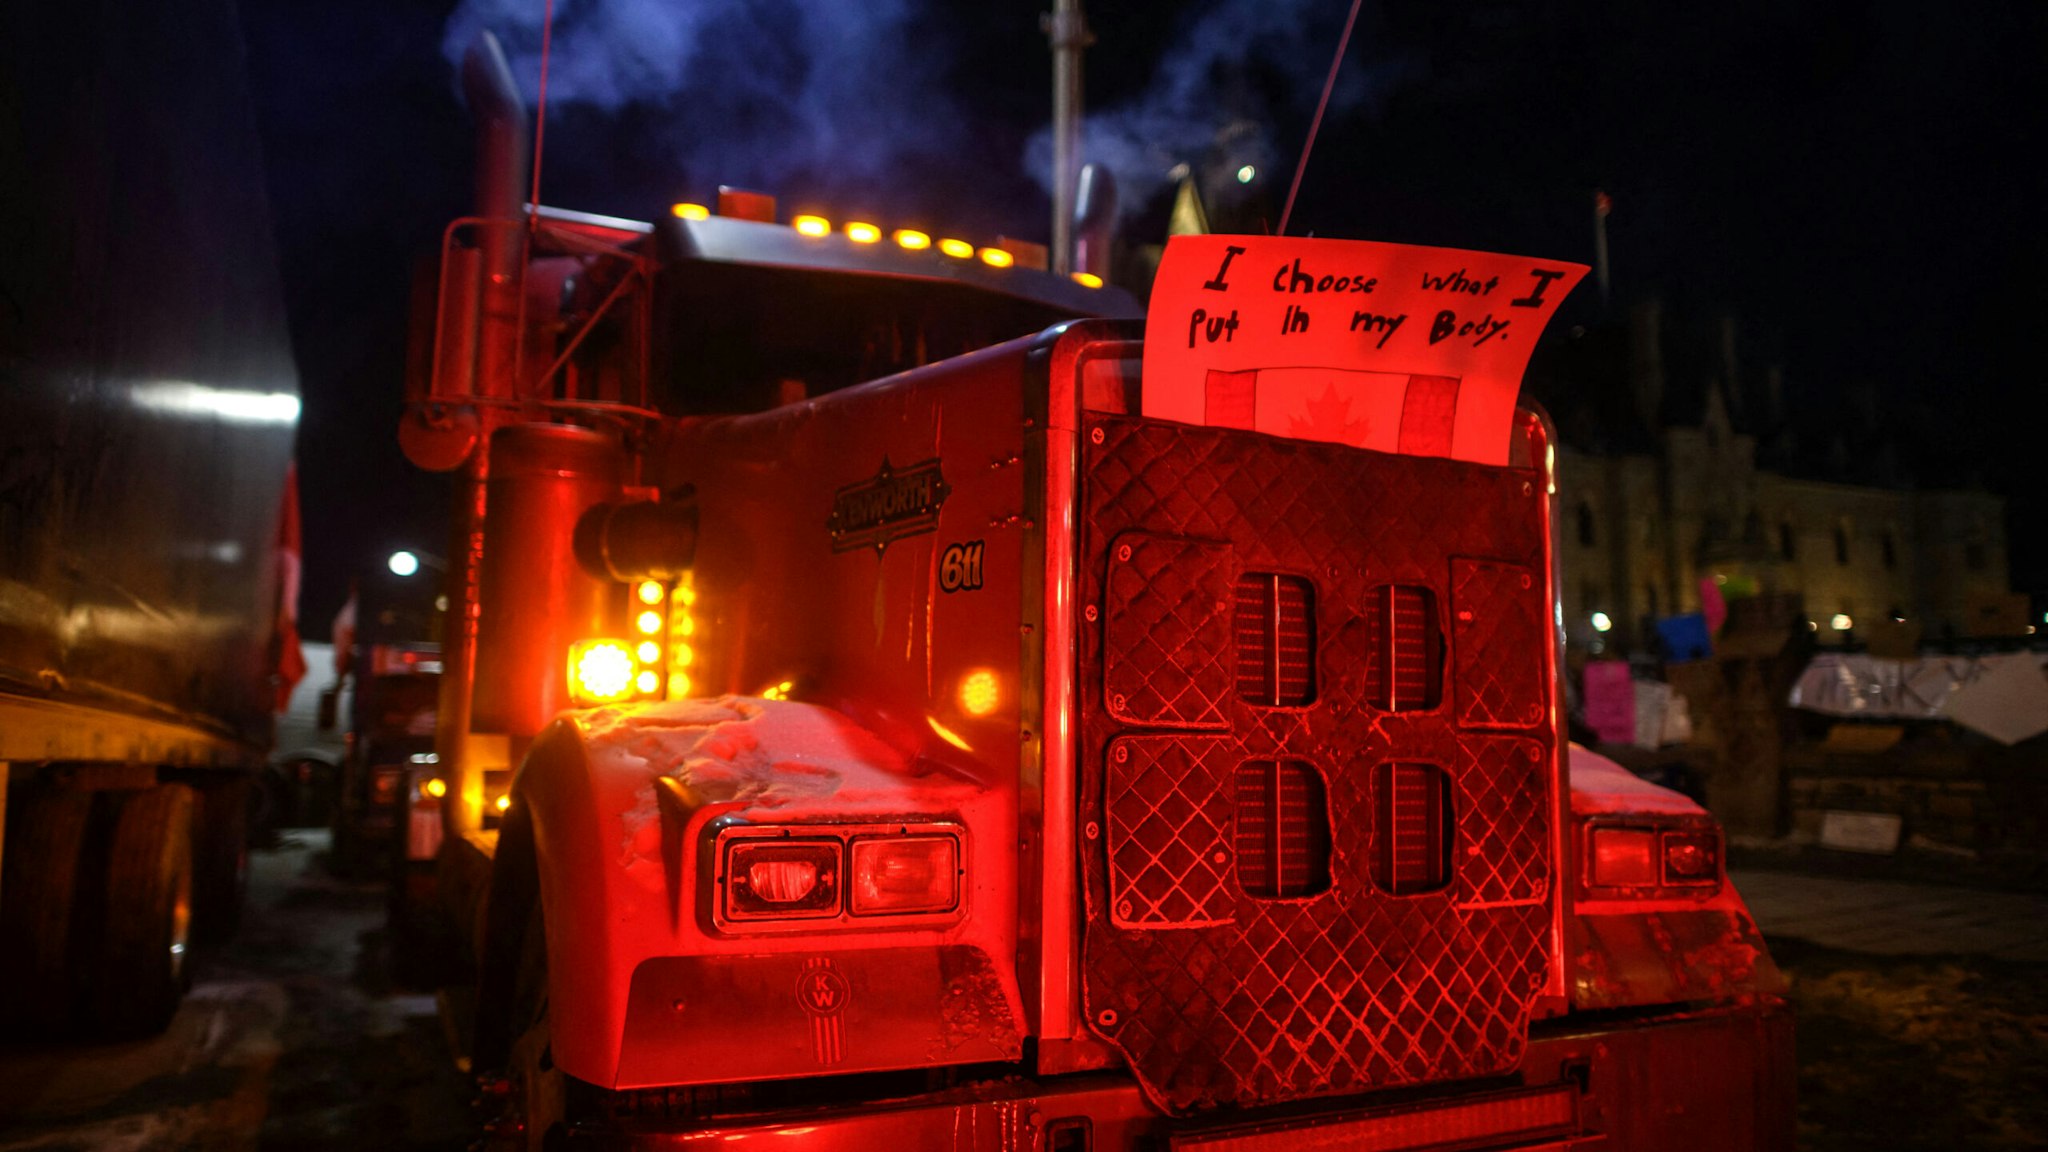 TOPSHOT - A slogan is displayed on the frot of a truck blocking a road during a protest by truck drivers over pandemic health rules and the Trudeau government, outside the parliament of Canada in Ottawa on February 14, 2022. - Canadian Prime Minister Justin Trudeau on Monday invoked rarely used emergency powers to bring an end to trucker-led protests against Covid health rules, after police arrested 11 people with a "cache of firearms" blocking a border crossing with the United States.